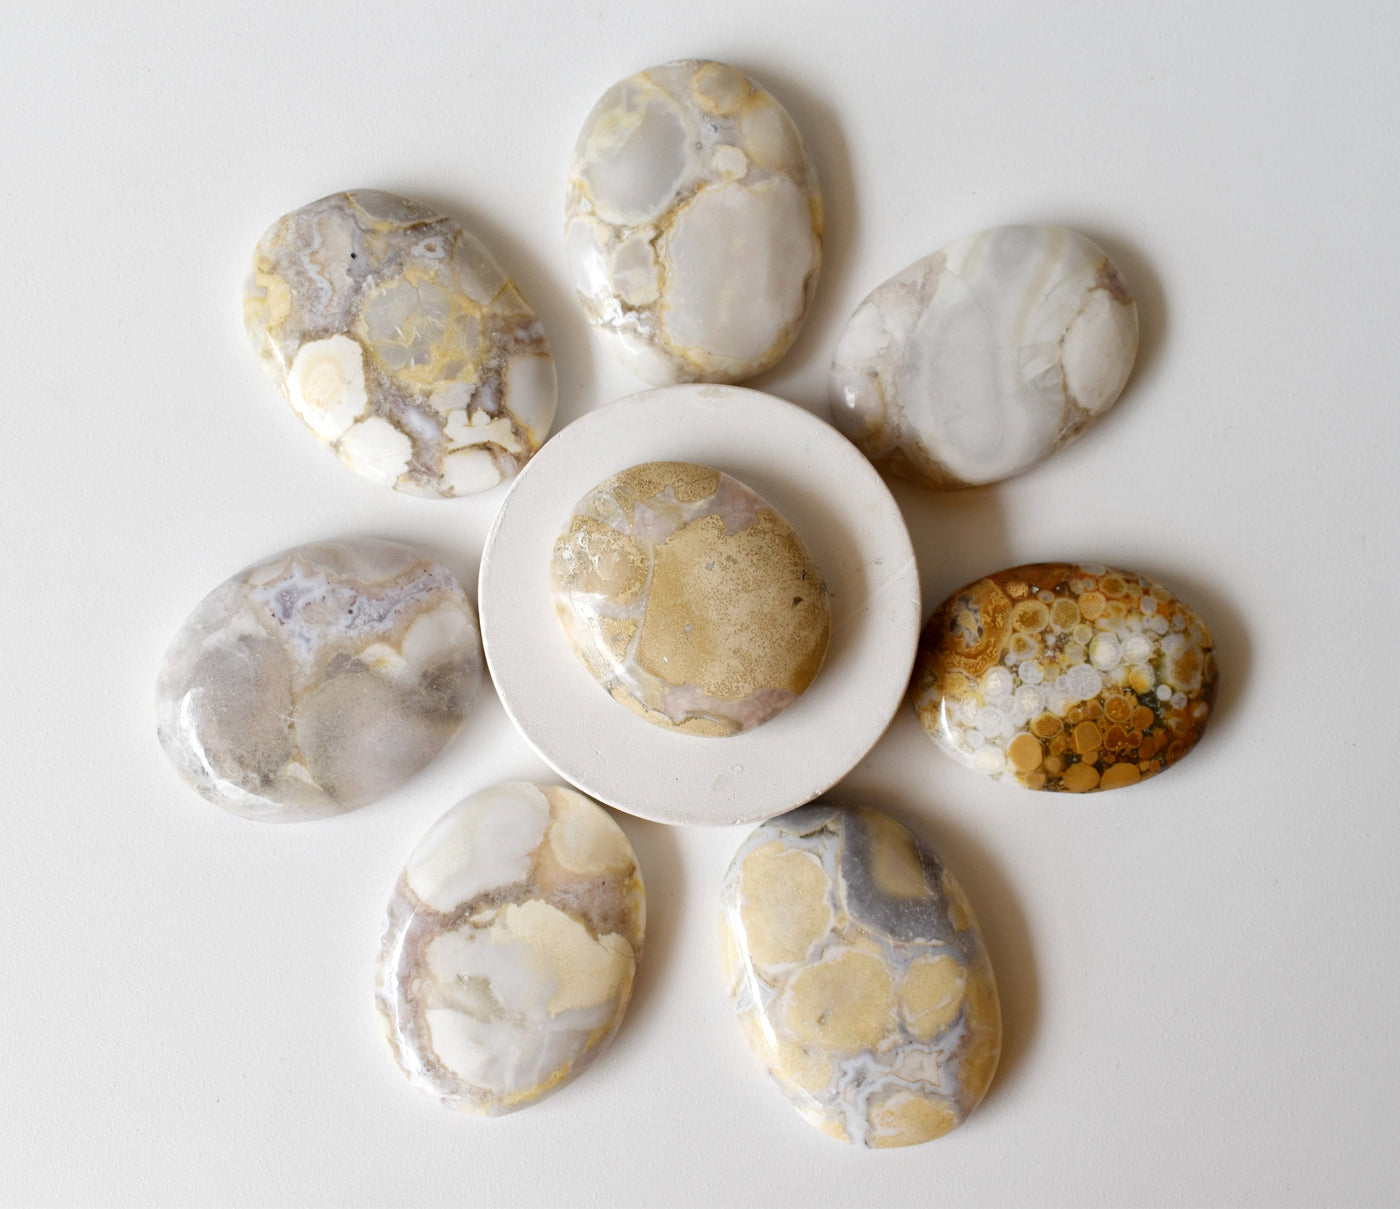 Conglomerate Pocket Stones(Depression and Negativity)